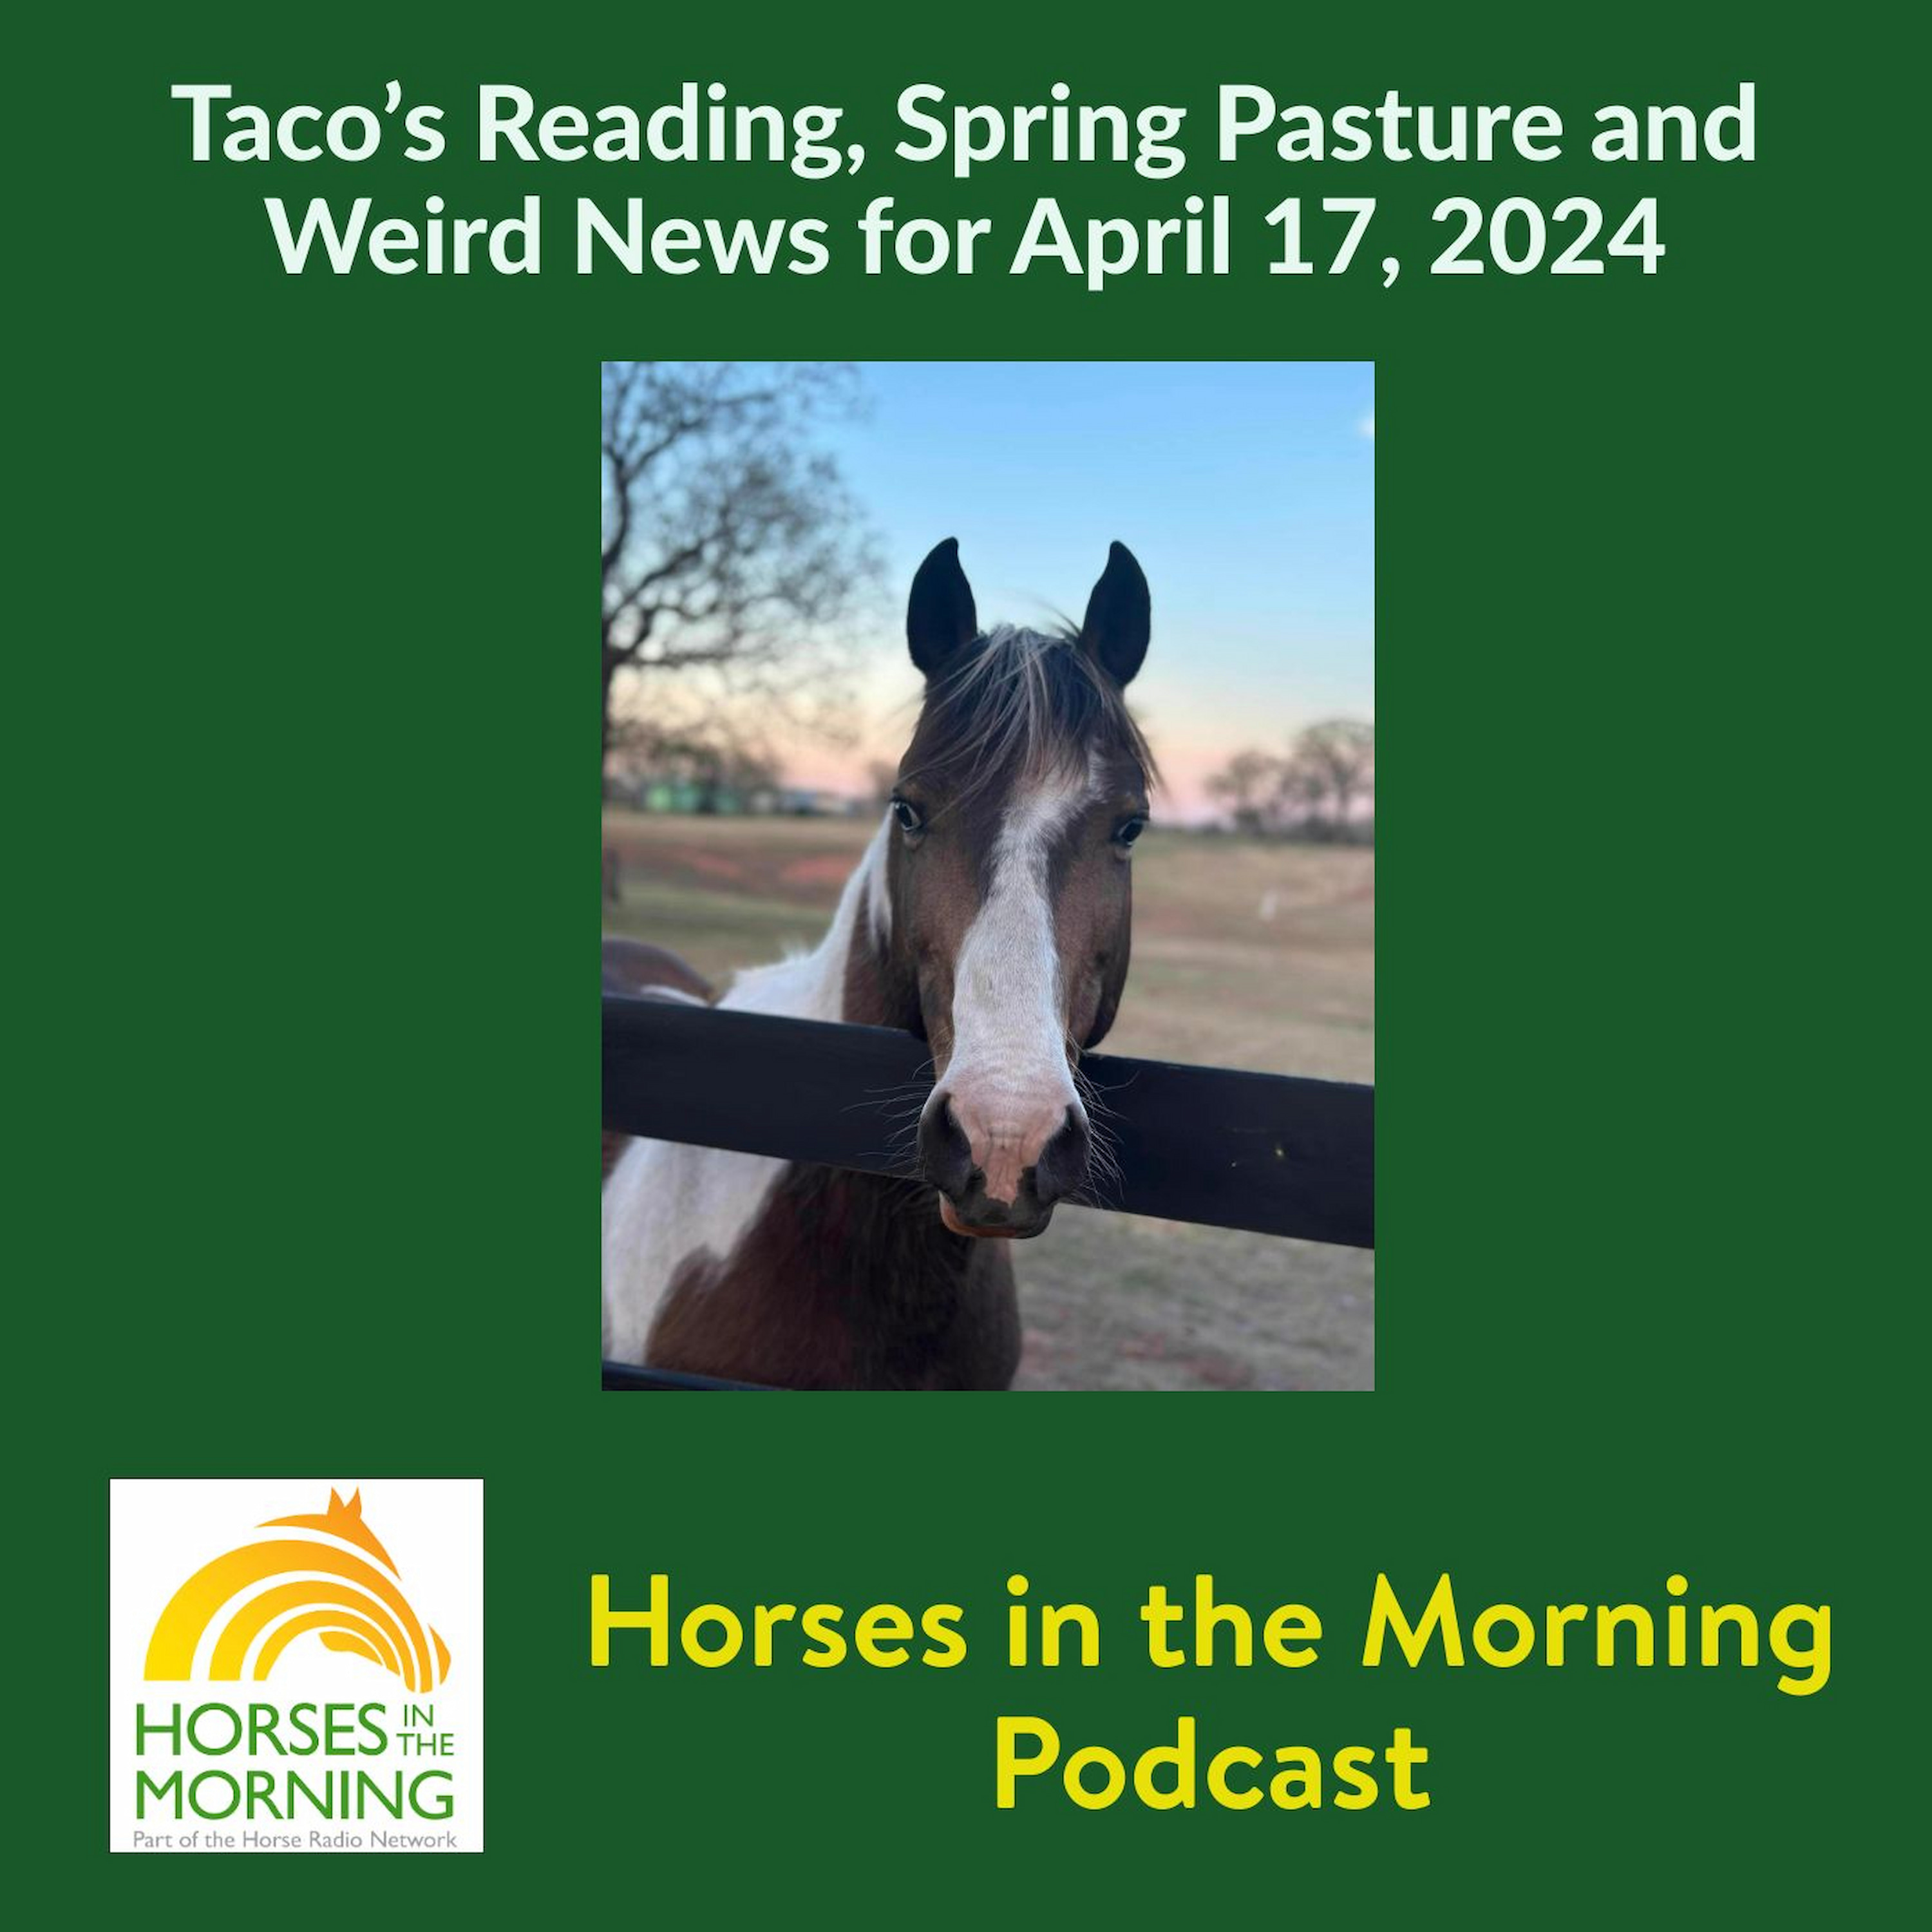 Taco’s Reading, Spring Pasture and Weird News for April 17, 2024